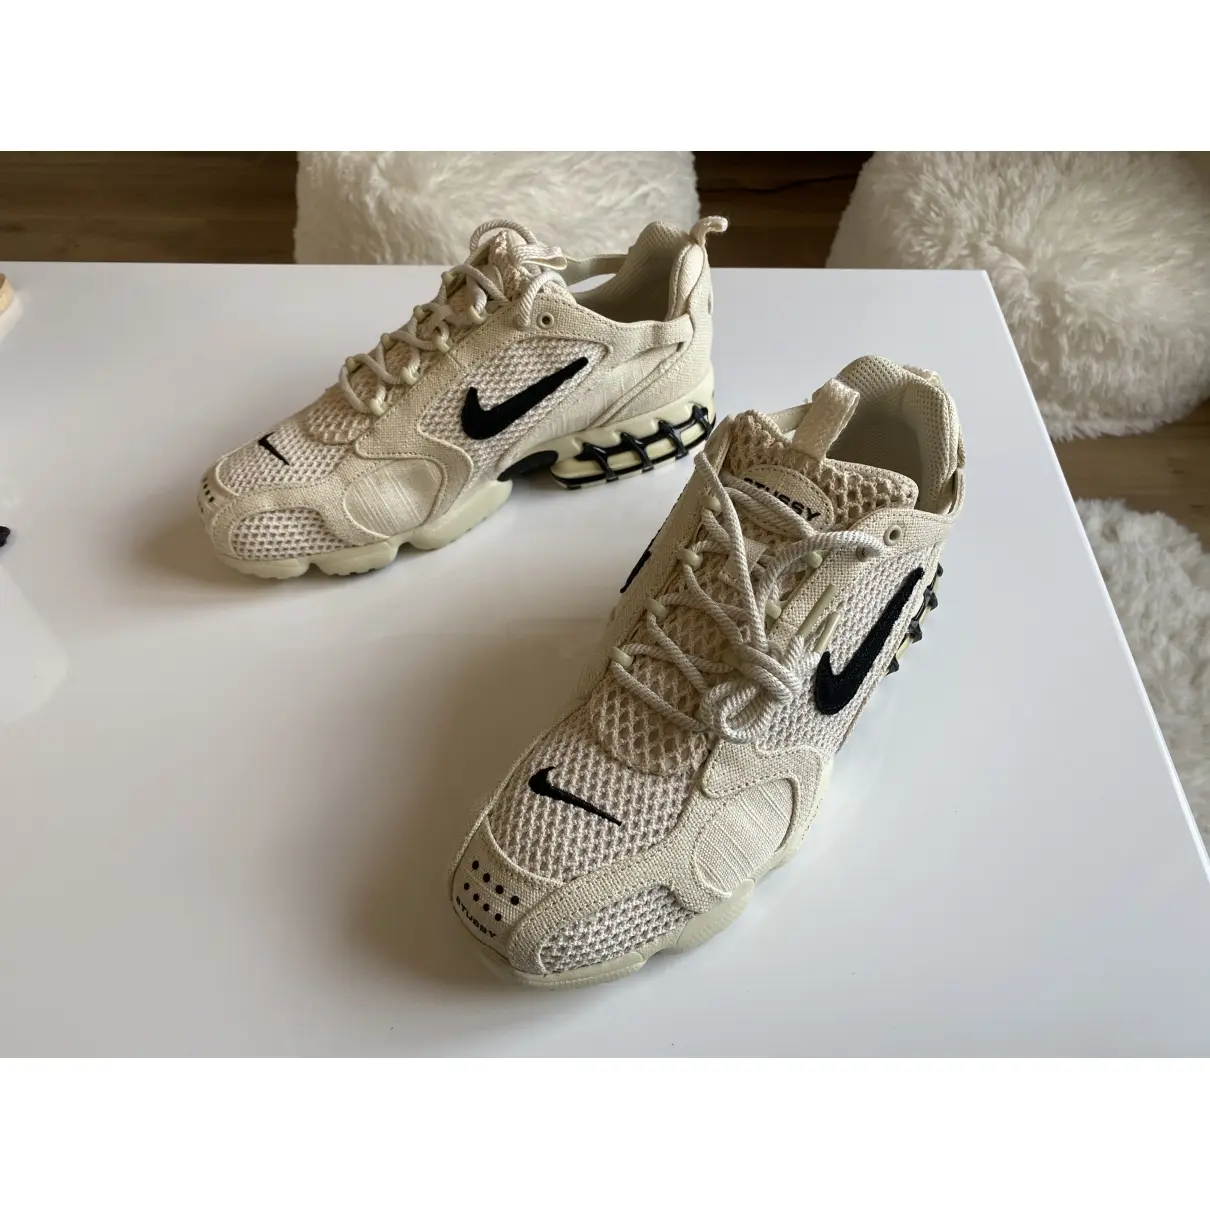 Nike x Stussy Cloth low trainers for sale